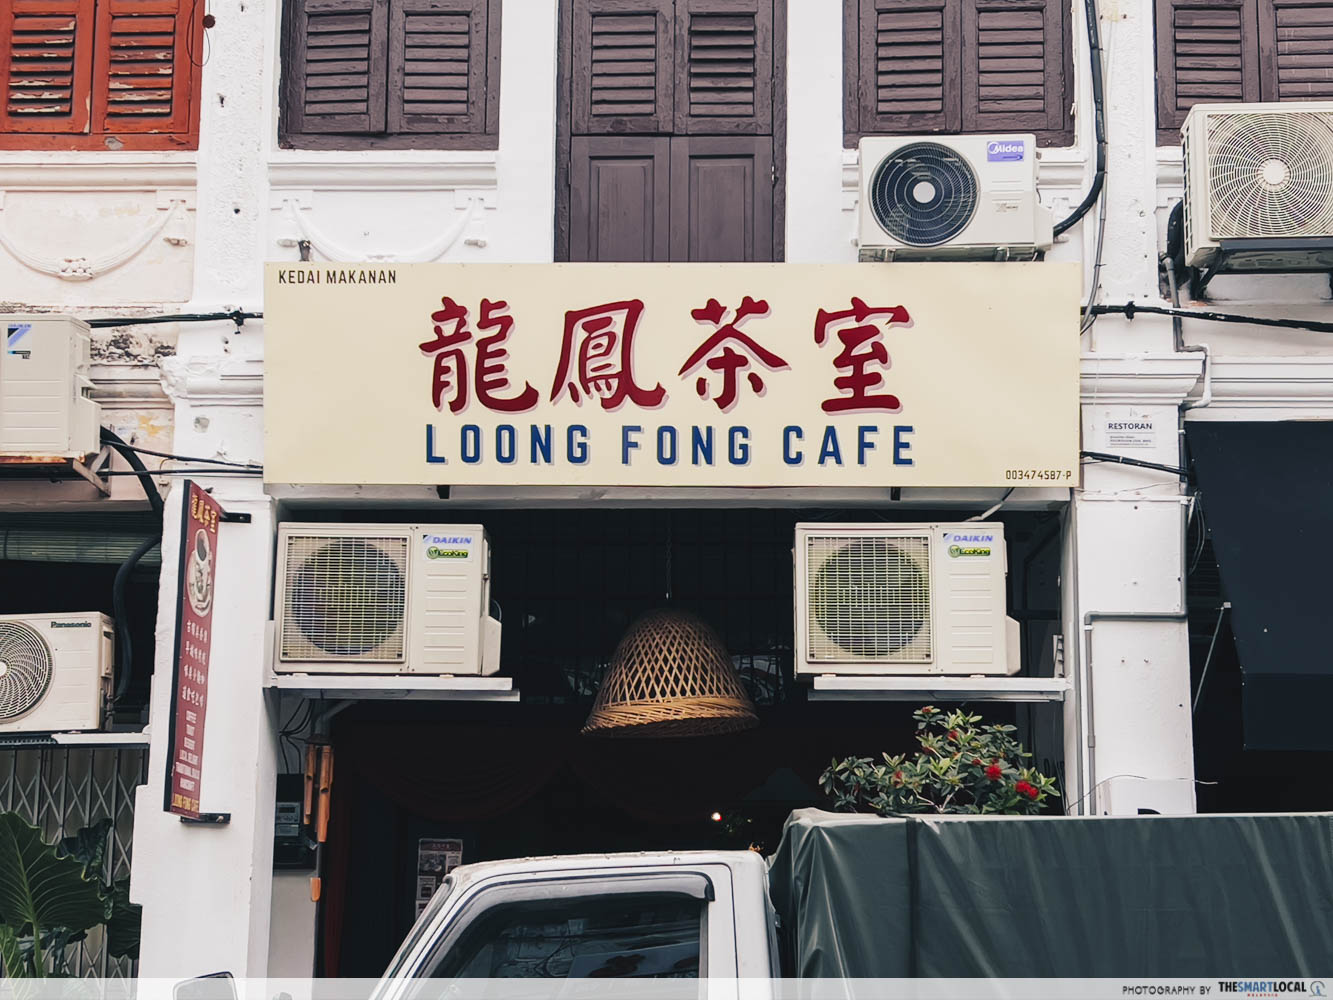 Loong Fong Cafe - entrance